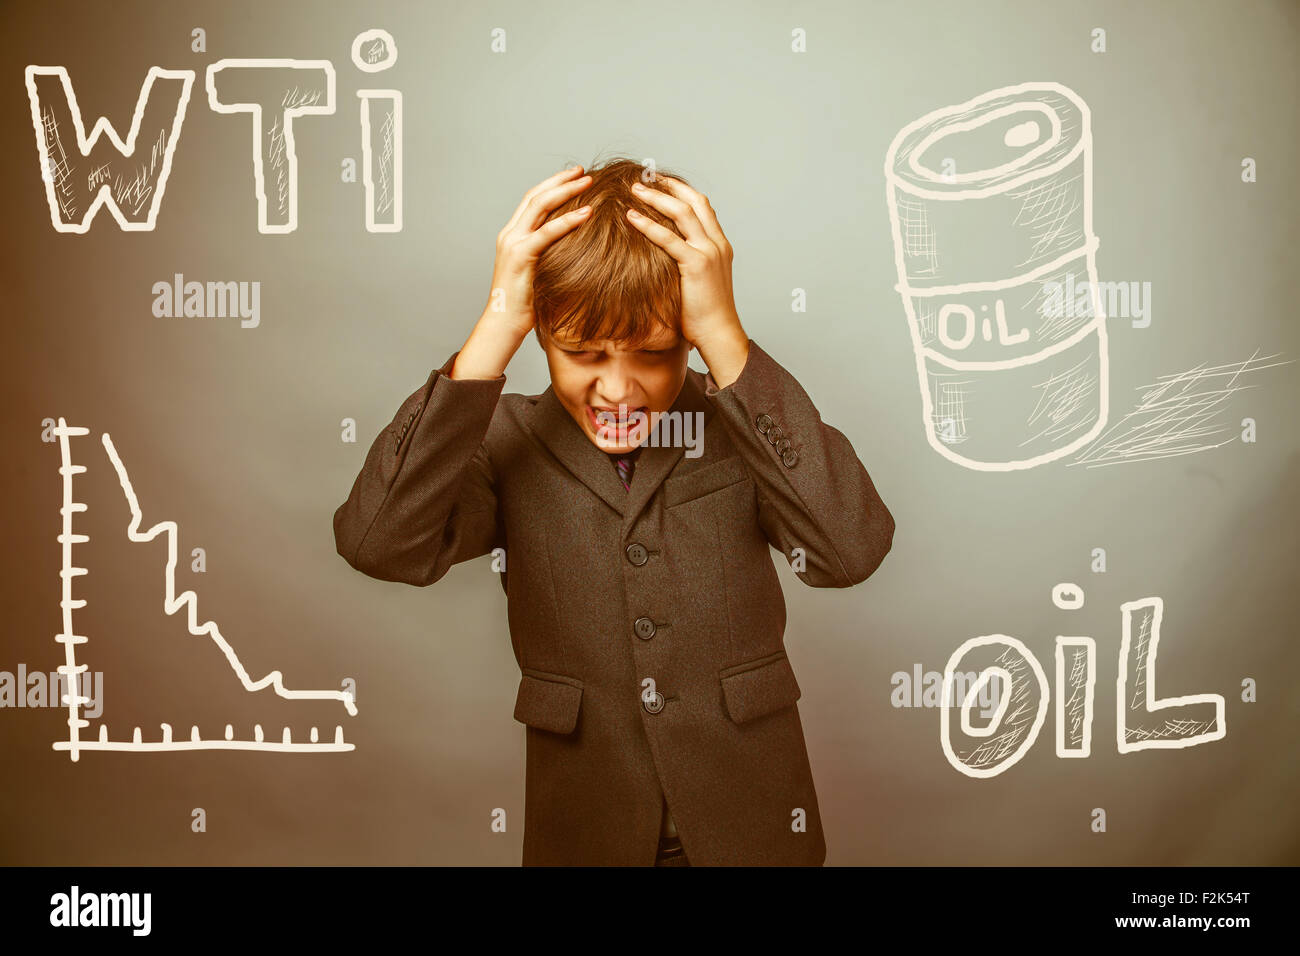 drop in the price of oil barrel WTI businessman teenager holding Stock Photo